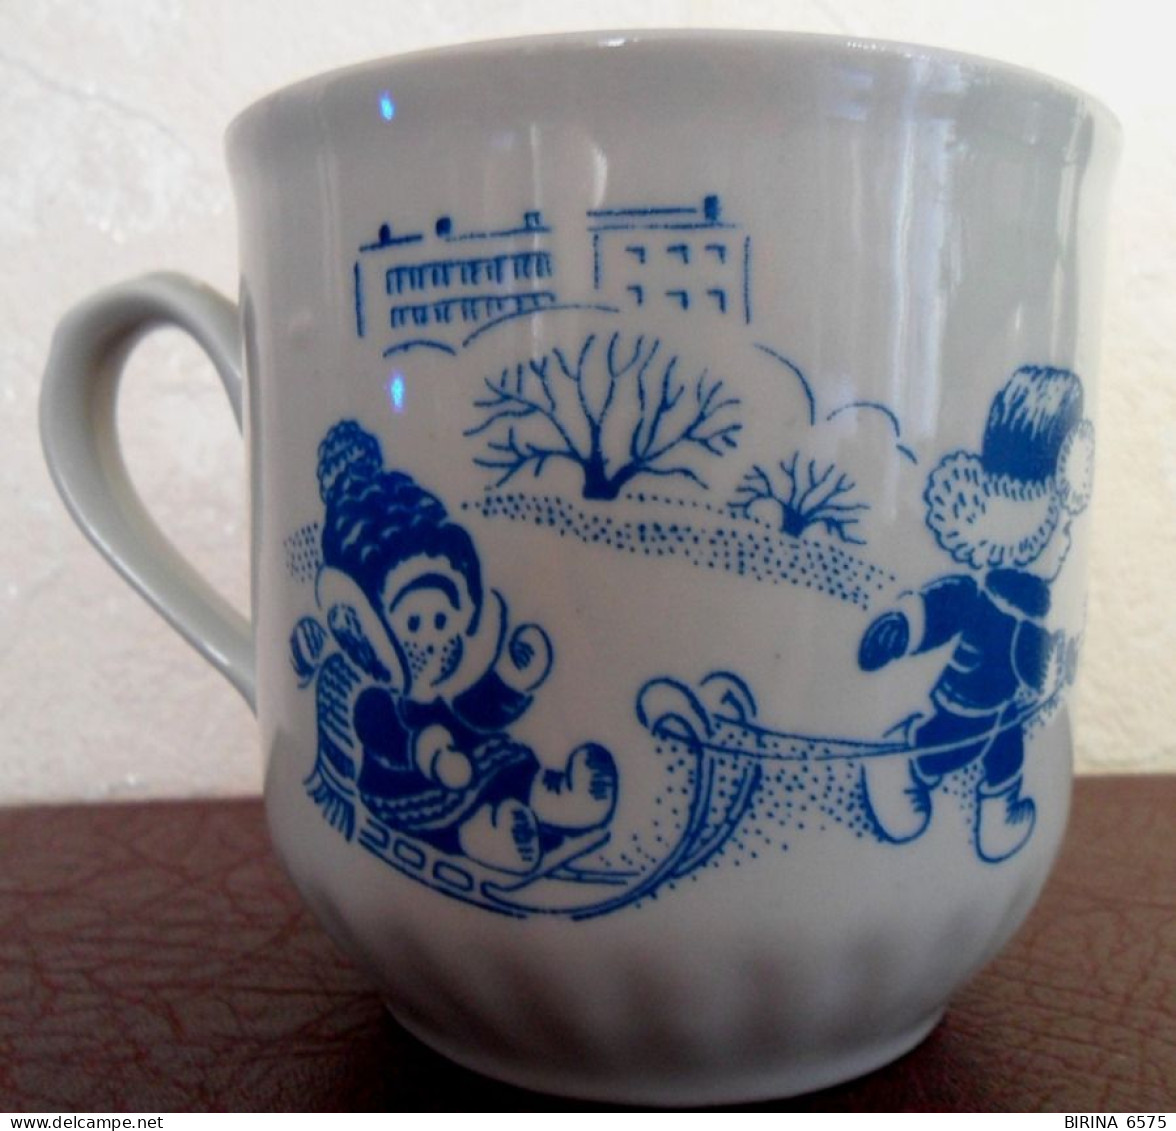 A Cup. Cup. CHILDREN'S WINTER FUN. TERNOPIL PORCELAIN FACTORY. USSR. - 8-49-i - Tazze